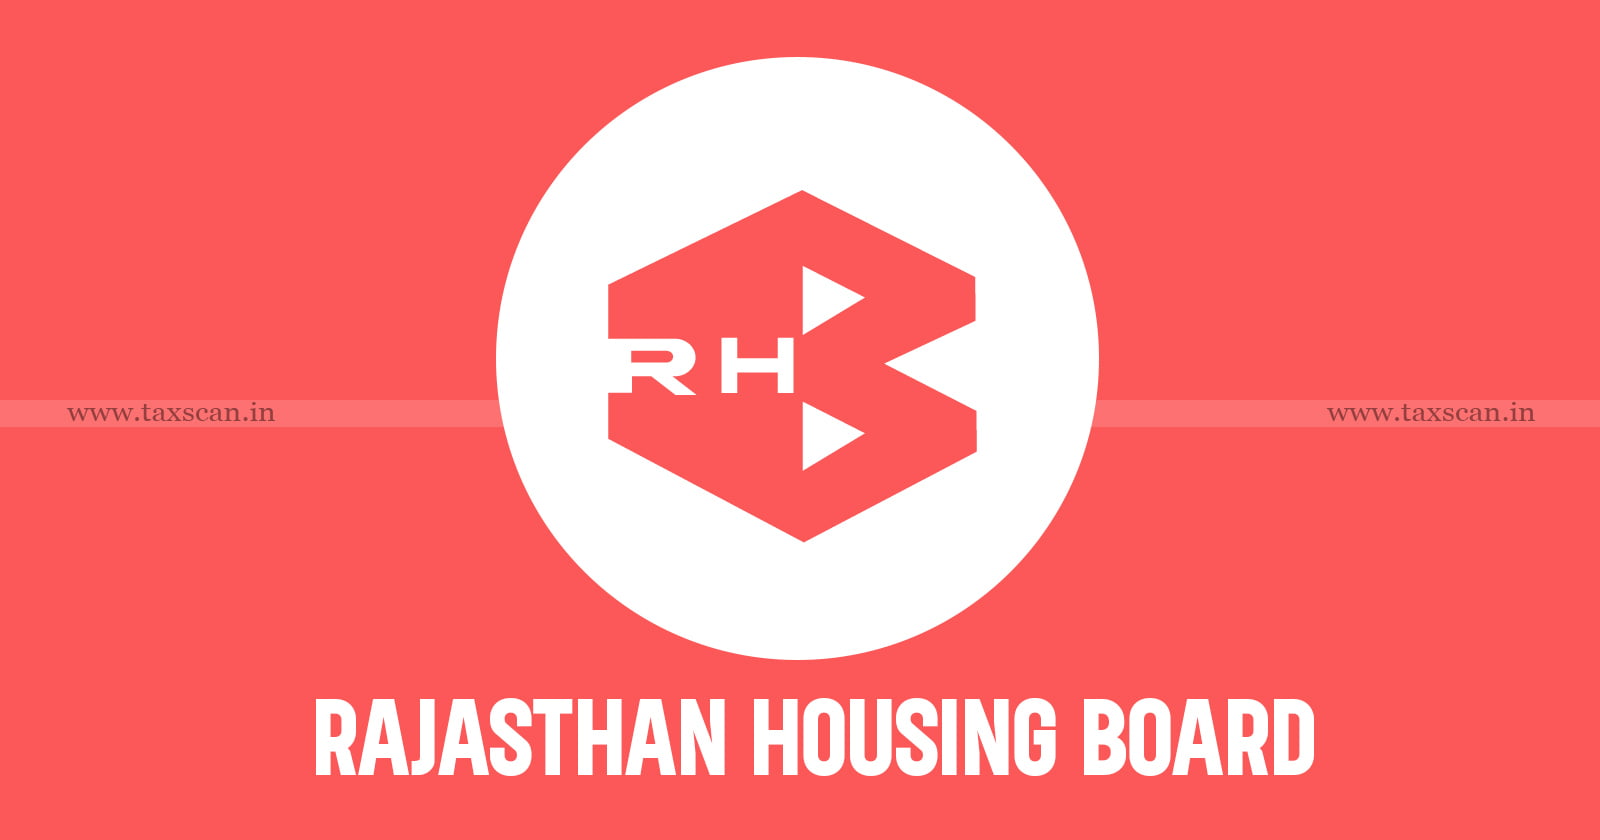 Services of Construction - Construction and Recarpeting - Services of Construction and Recarpeting - Commercial Complex Road - Rajasthan Housing Board - GST - AAR - taxscan